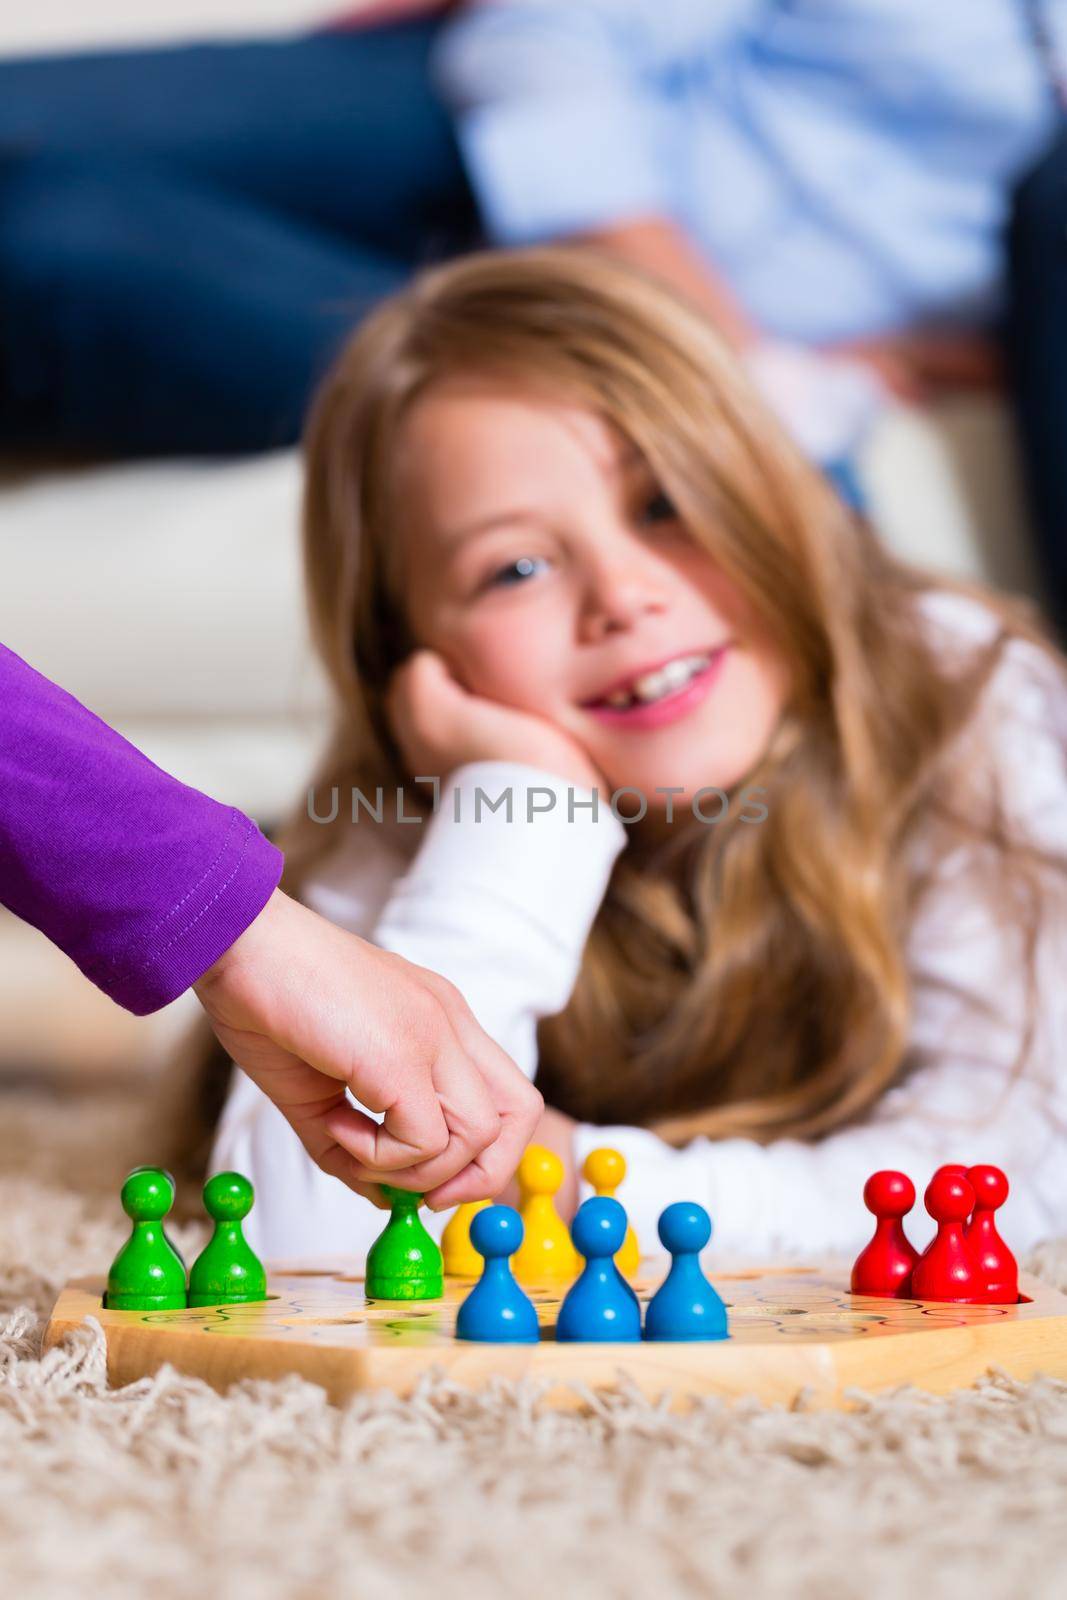 Family playing board game ludo at home on the floor, focus on the arm in front